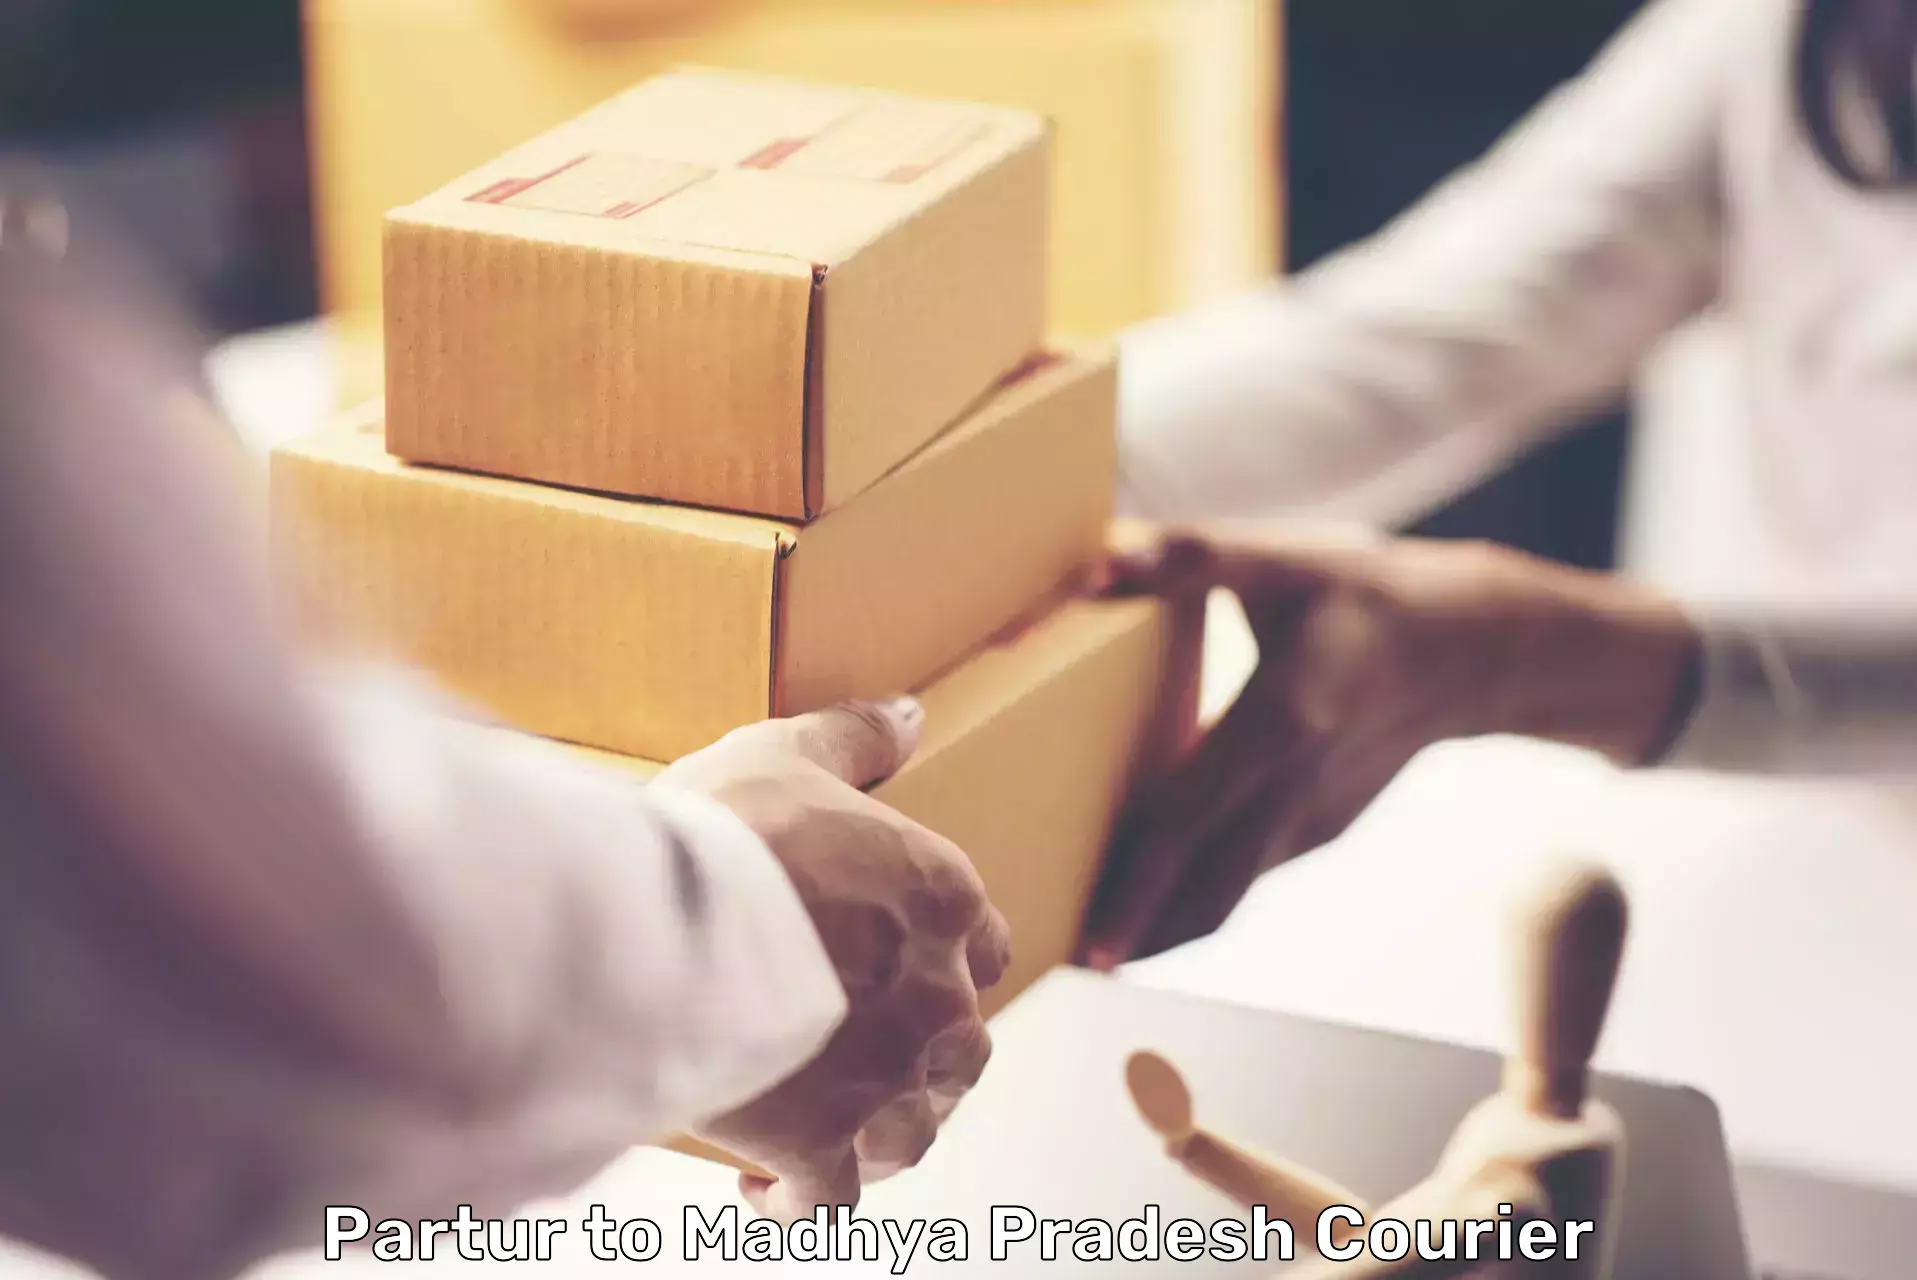 Easy access courier services in Partur to Madhya Pradesh